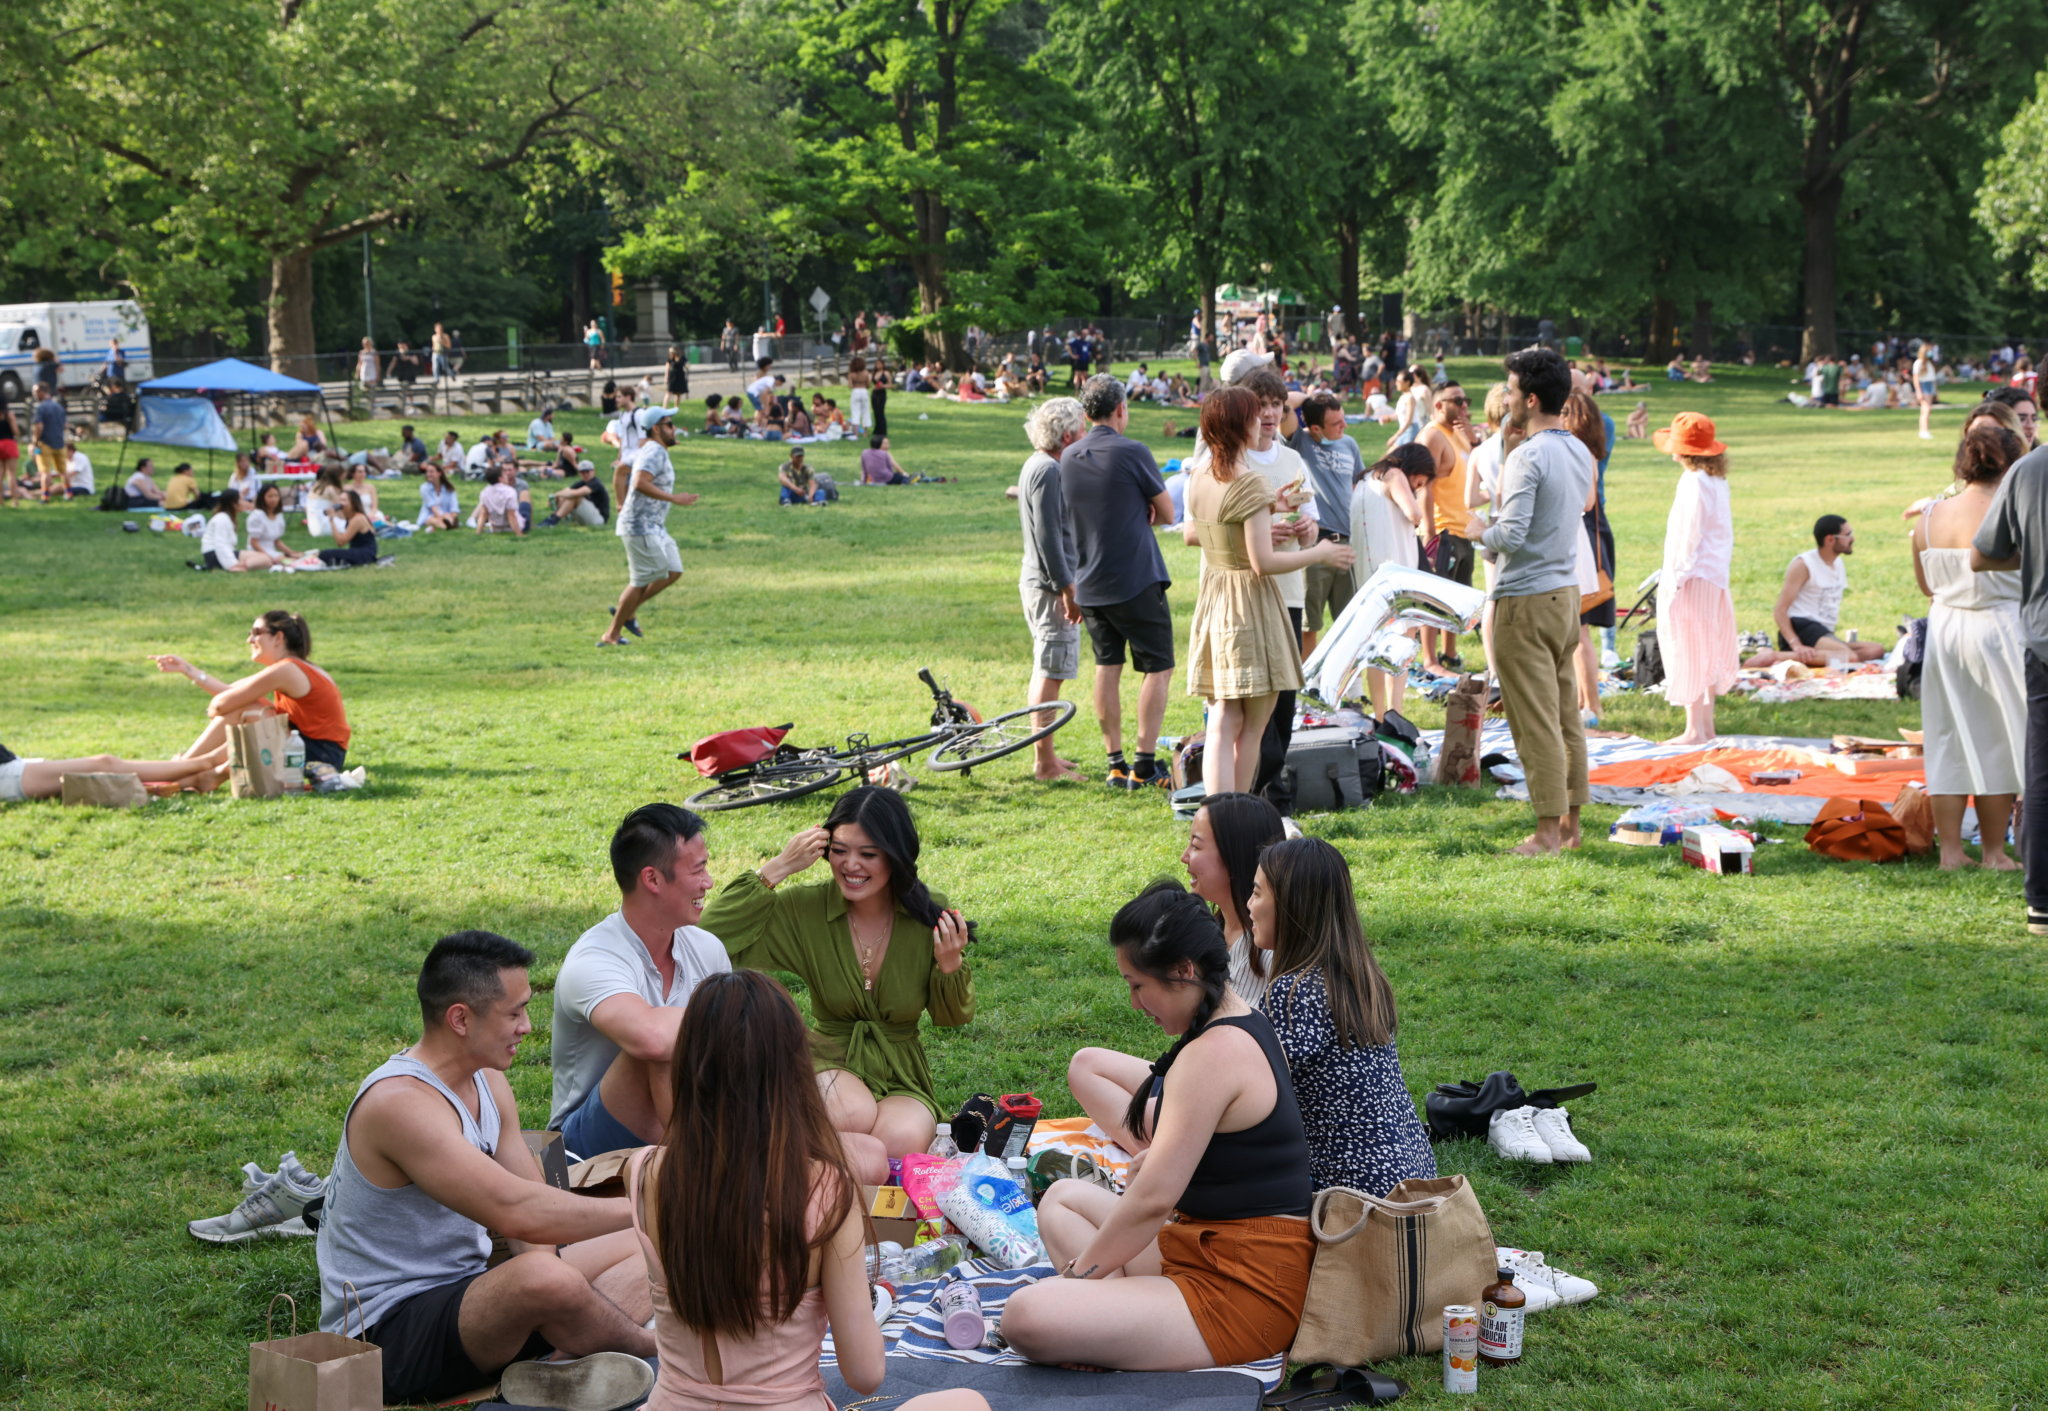 Massive Central Park comeback concert slated for August Week’ in NYC amNewYork